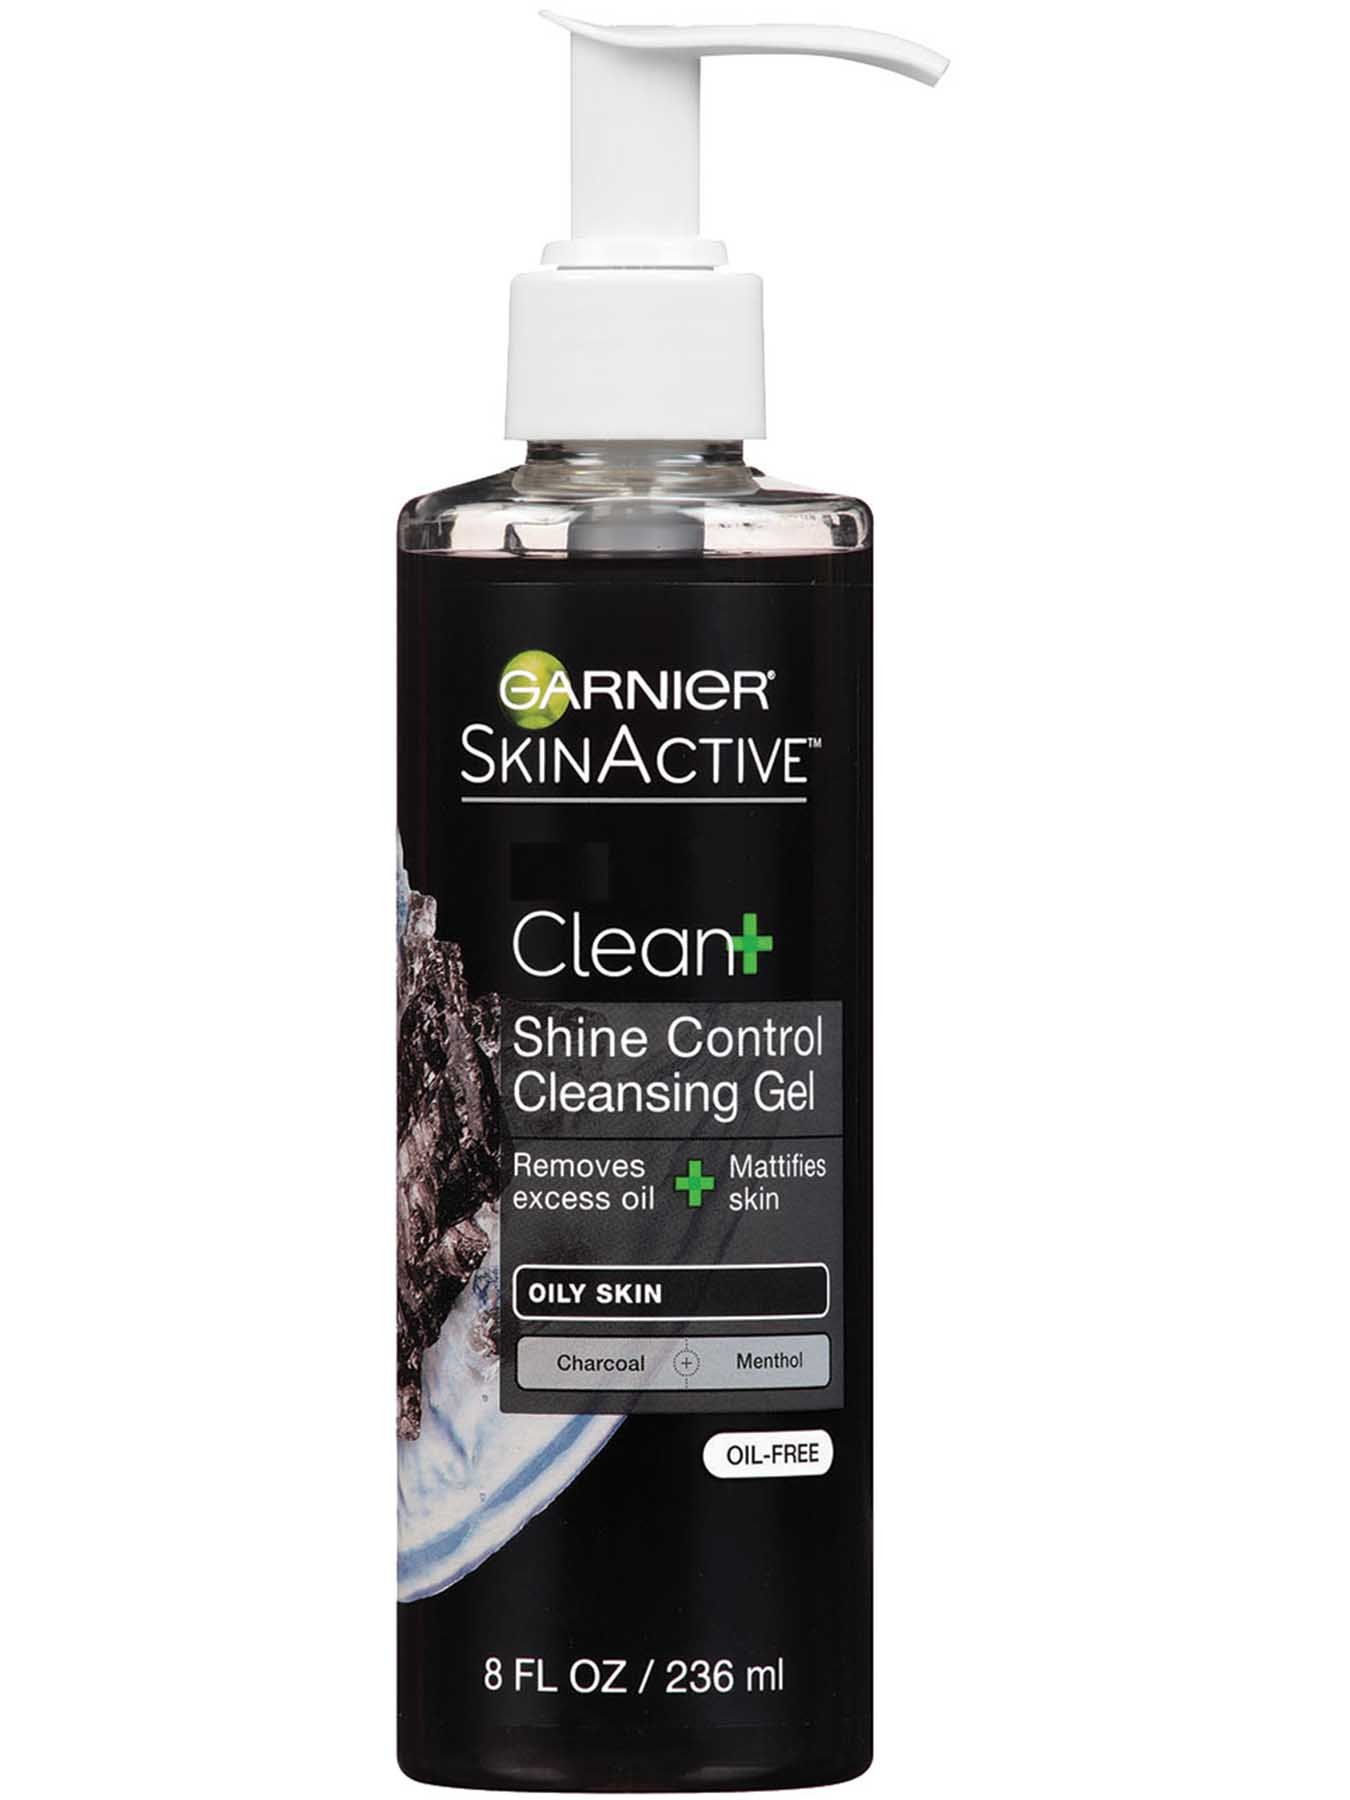 Front view of Clean+ Shine Control Cleansing Gel, Oily Skin, Oil Free.